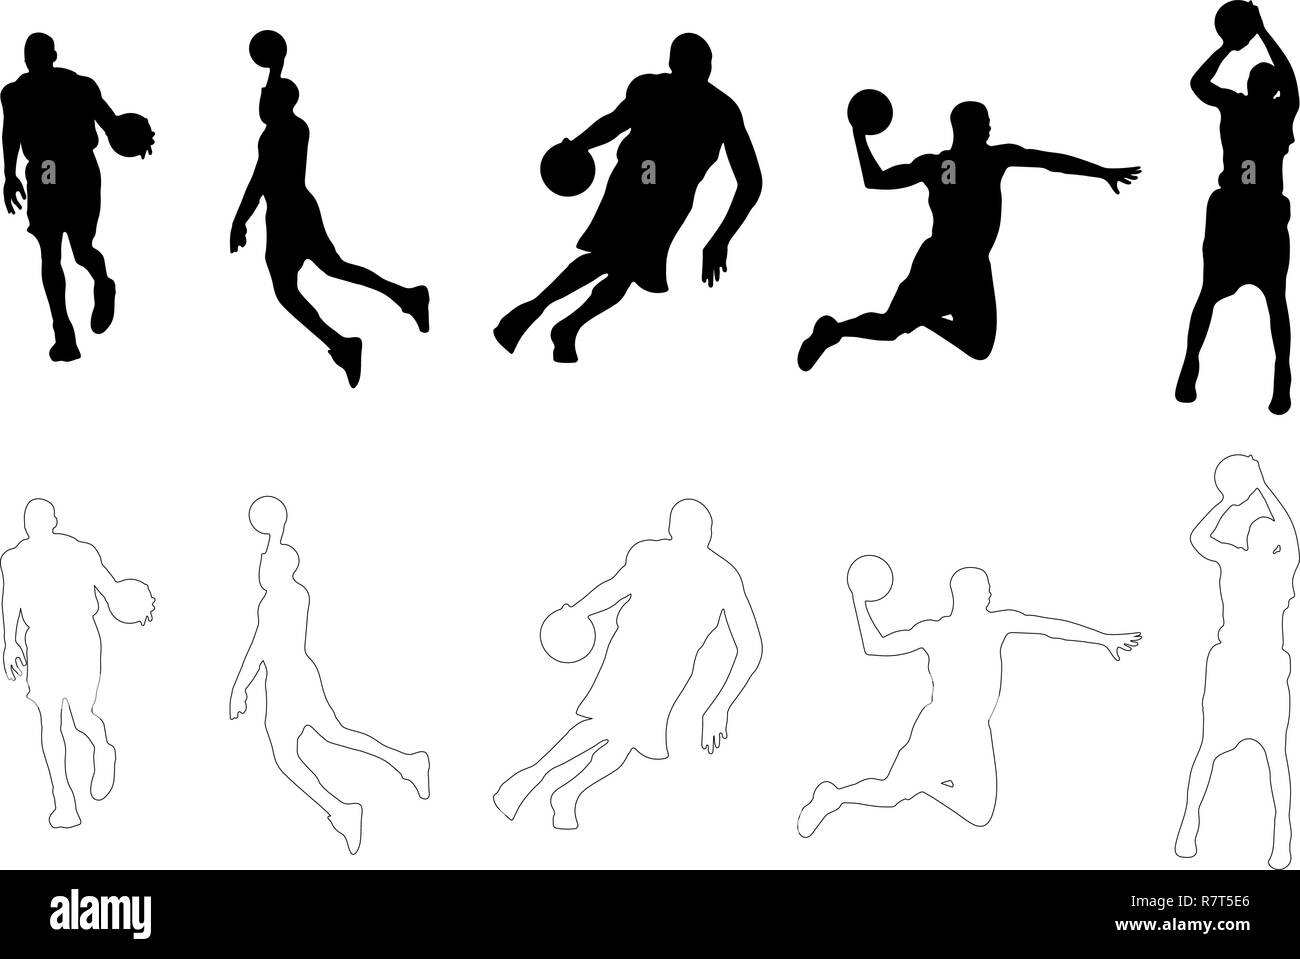 Basketball Player Silhouettes Outline Vector Stock Vector